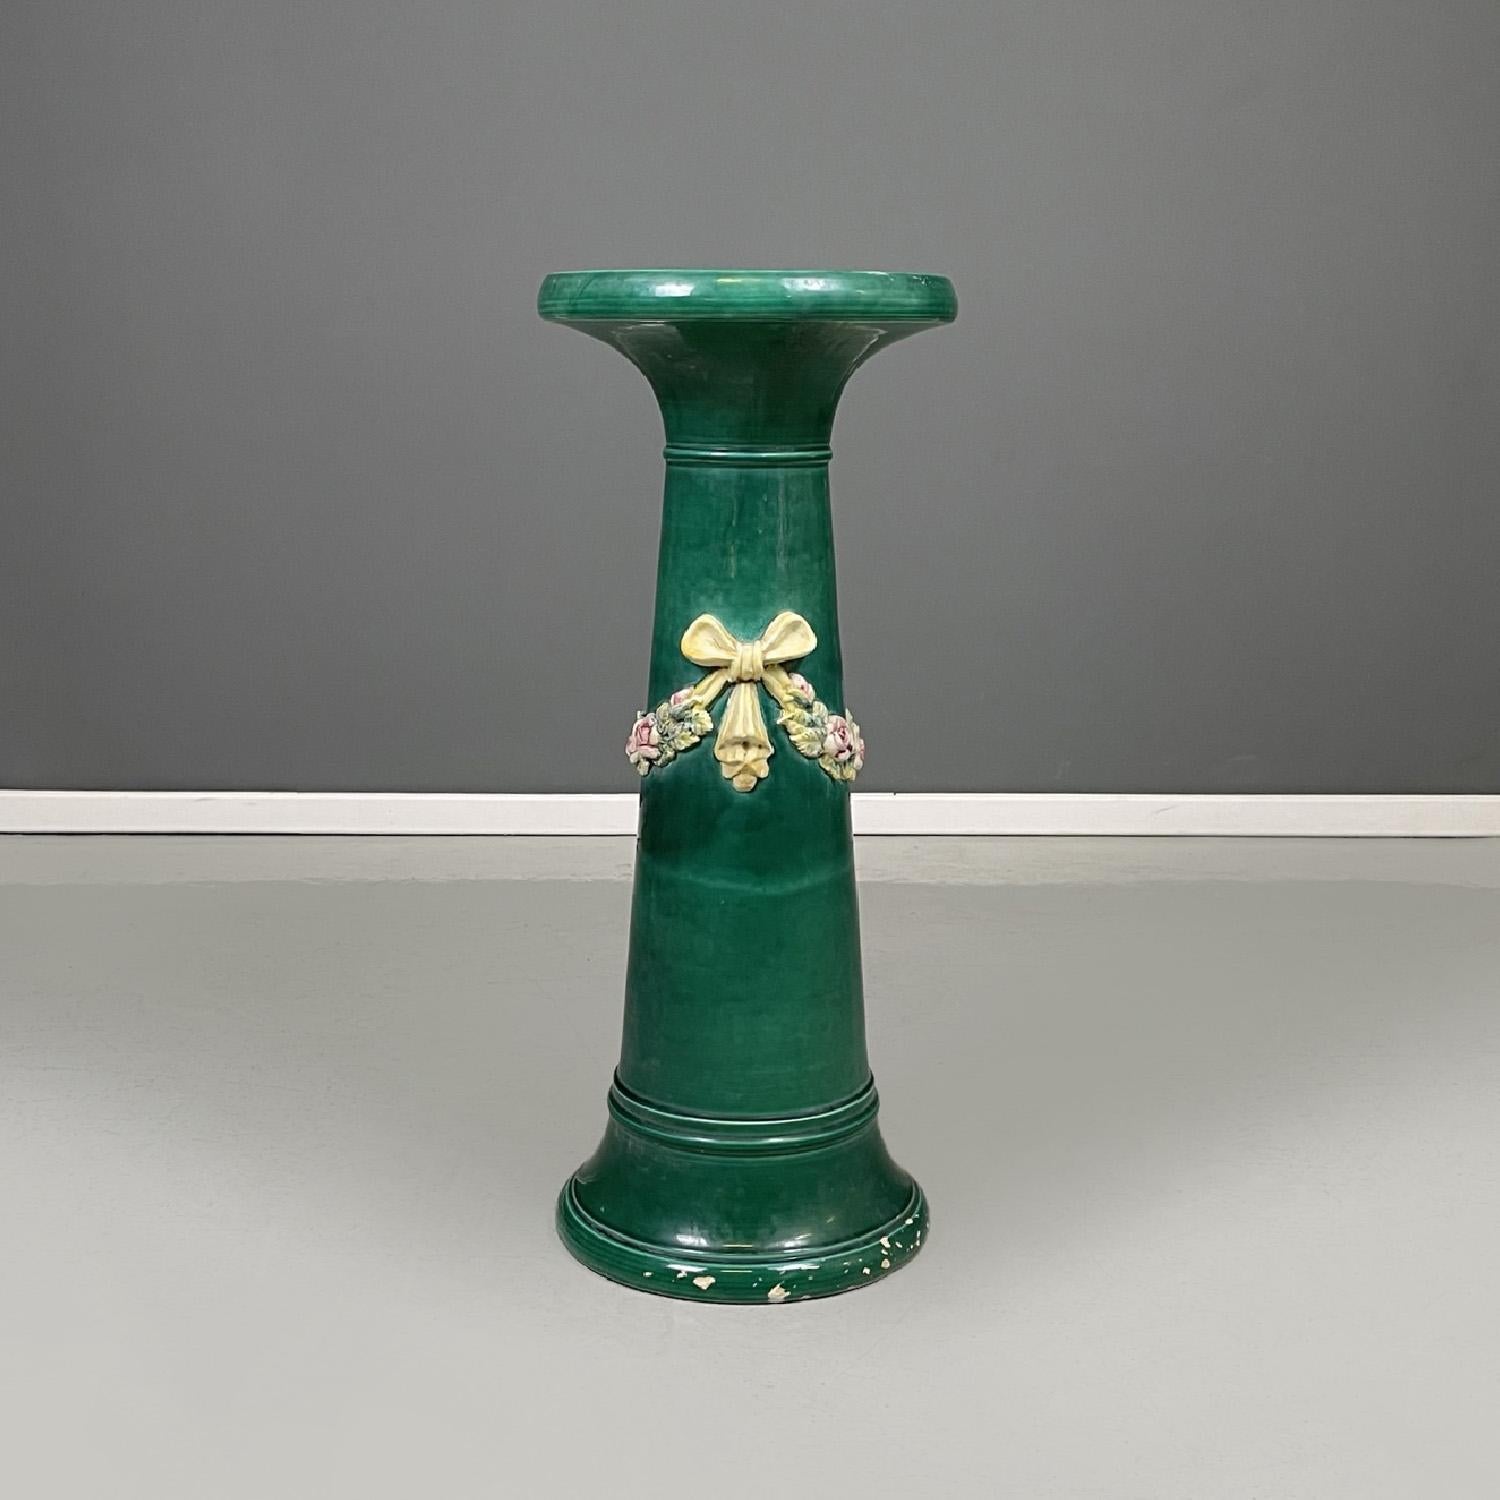 Empire Italian imperial style green ceramic columns pedestals bows and flowers, 1930s For Sale